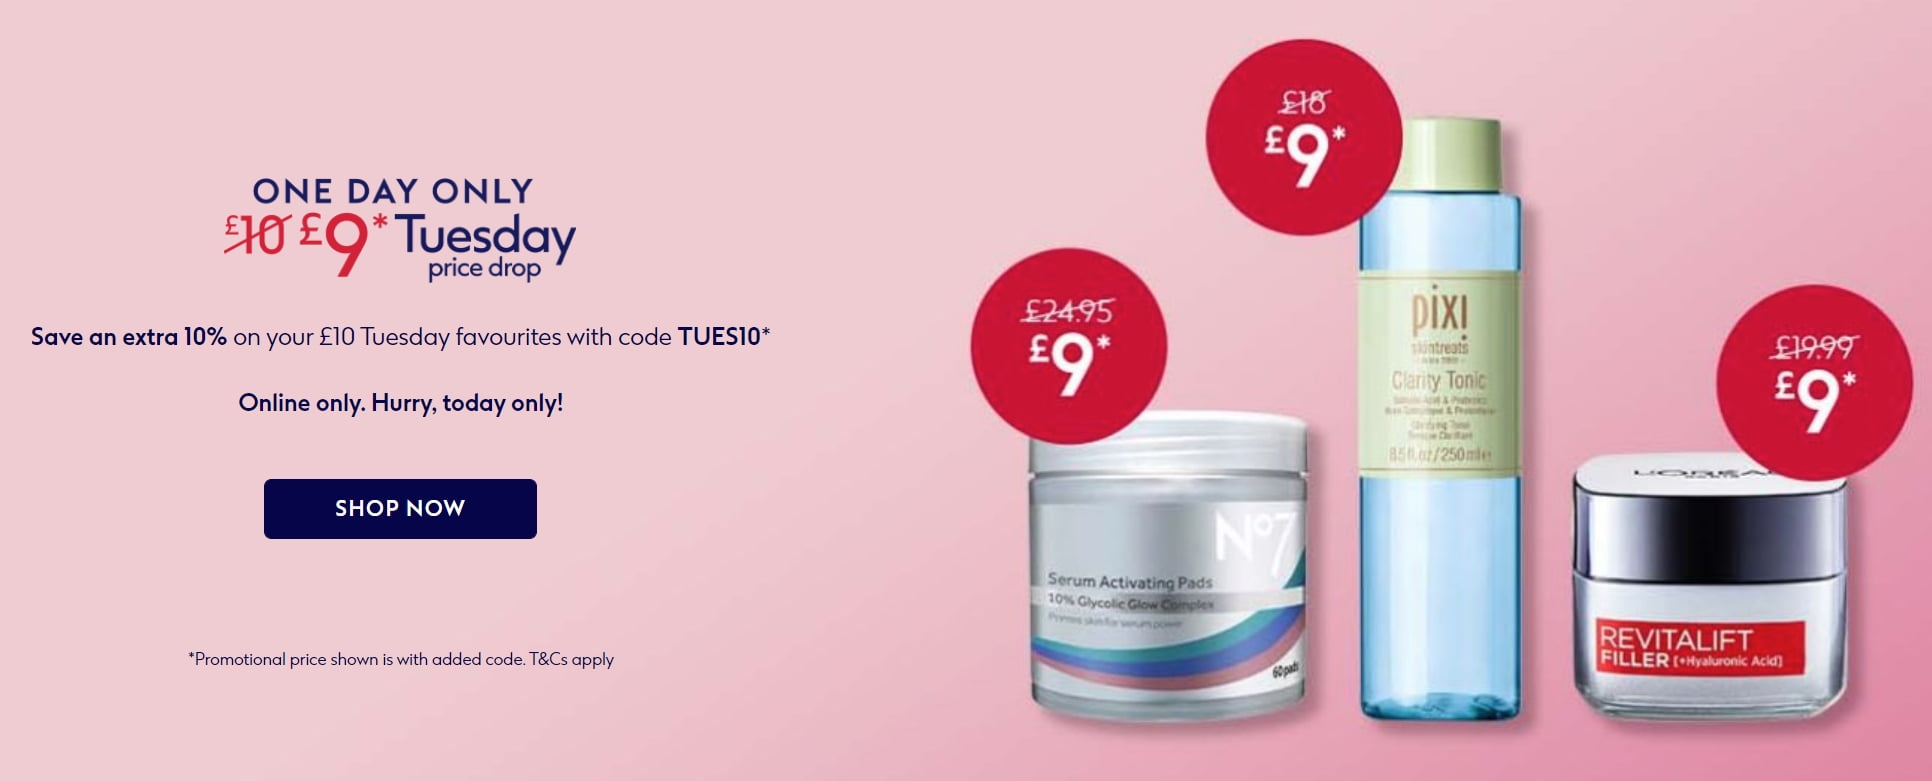 Receive an extra 10% off £10 Tuesday Products at Boots